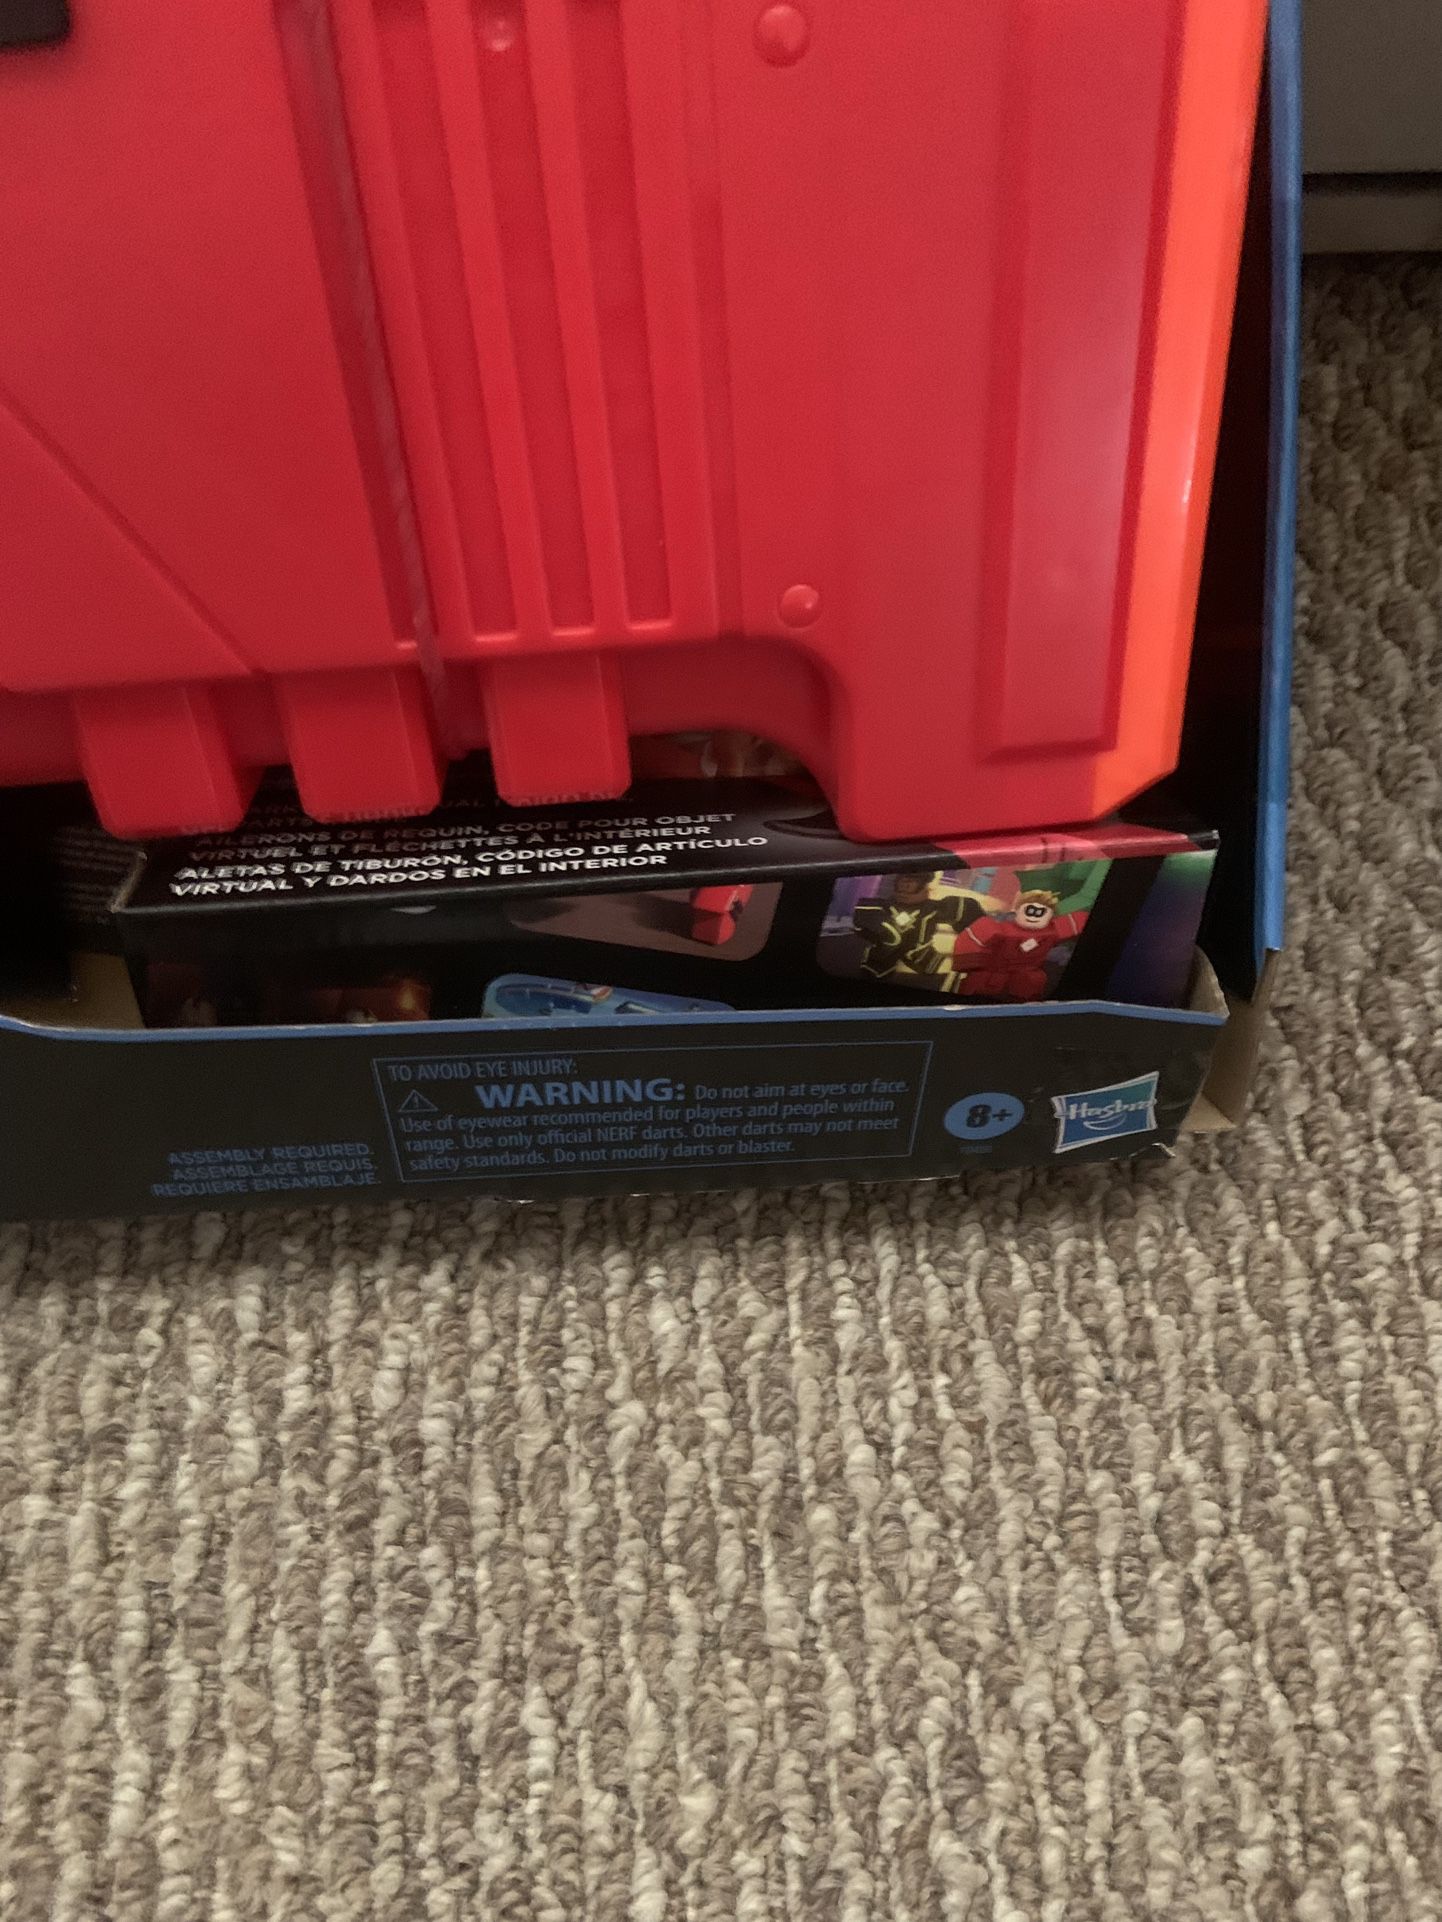 Roblox MM2 Shark Seeker Nerf-no Code for Sale in Federal Way, WA